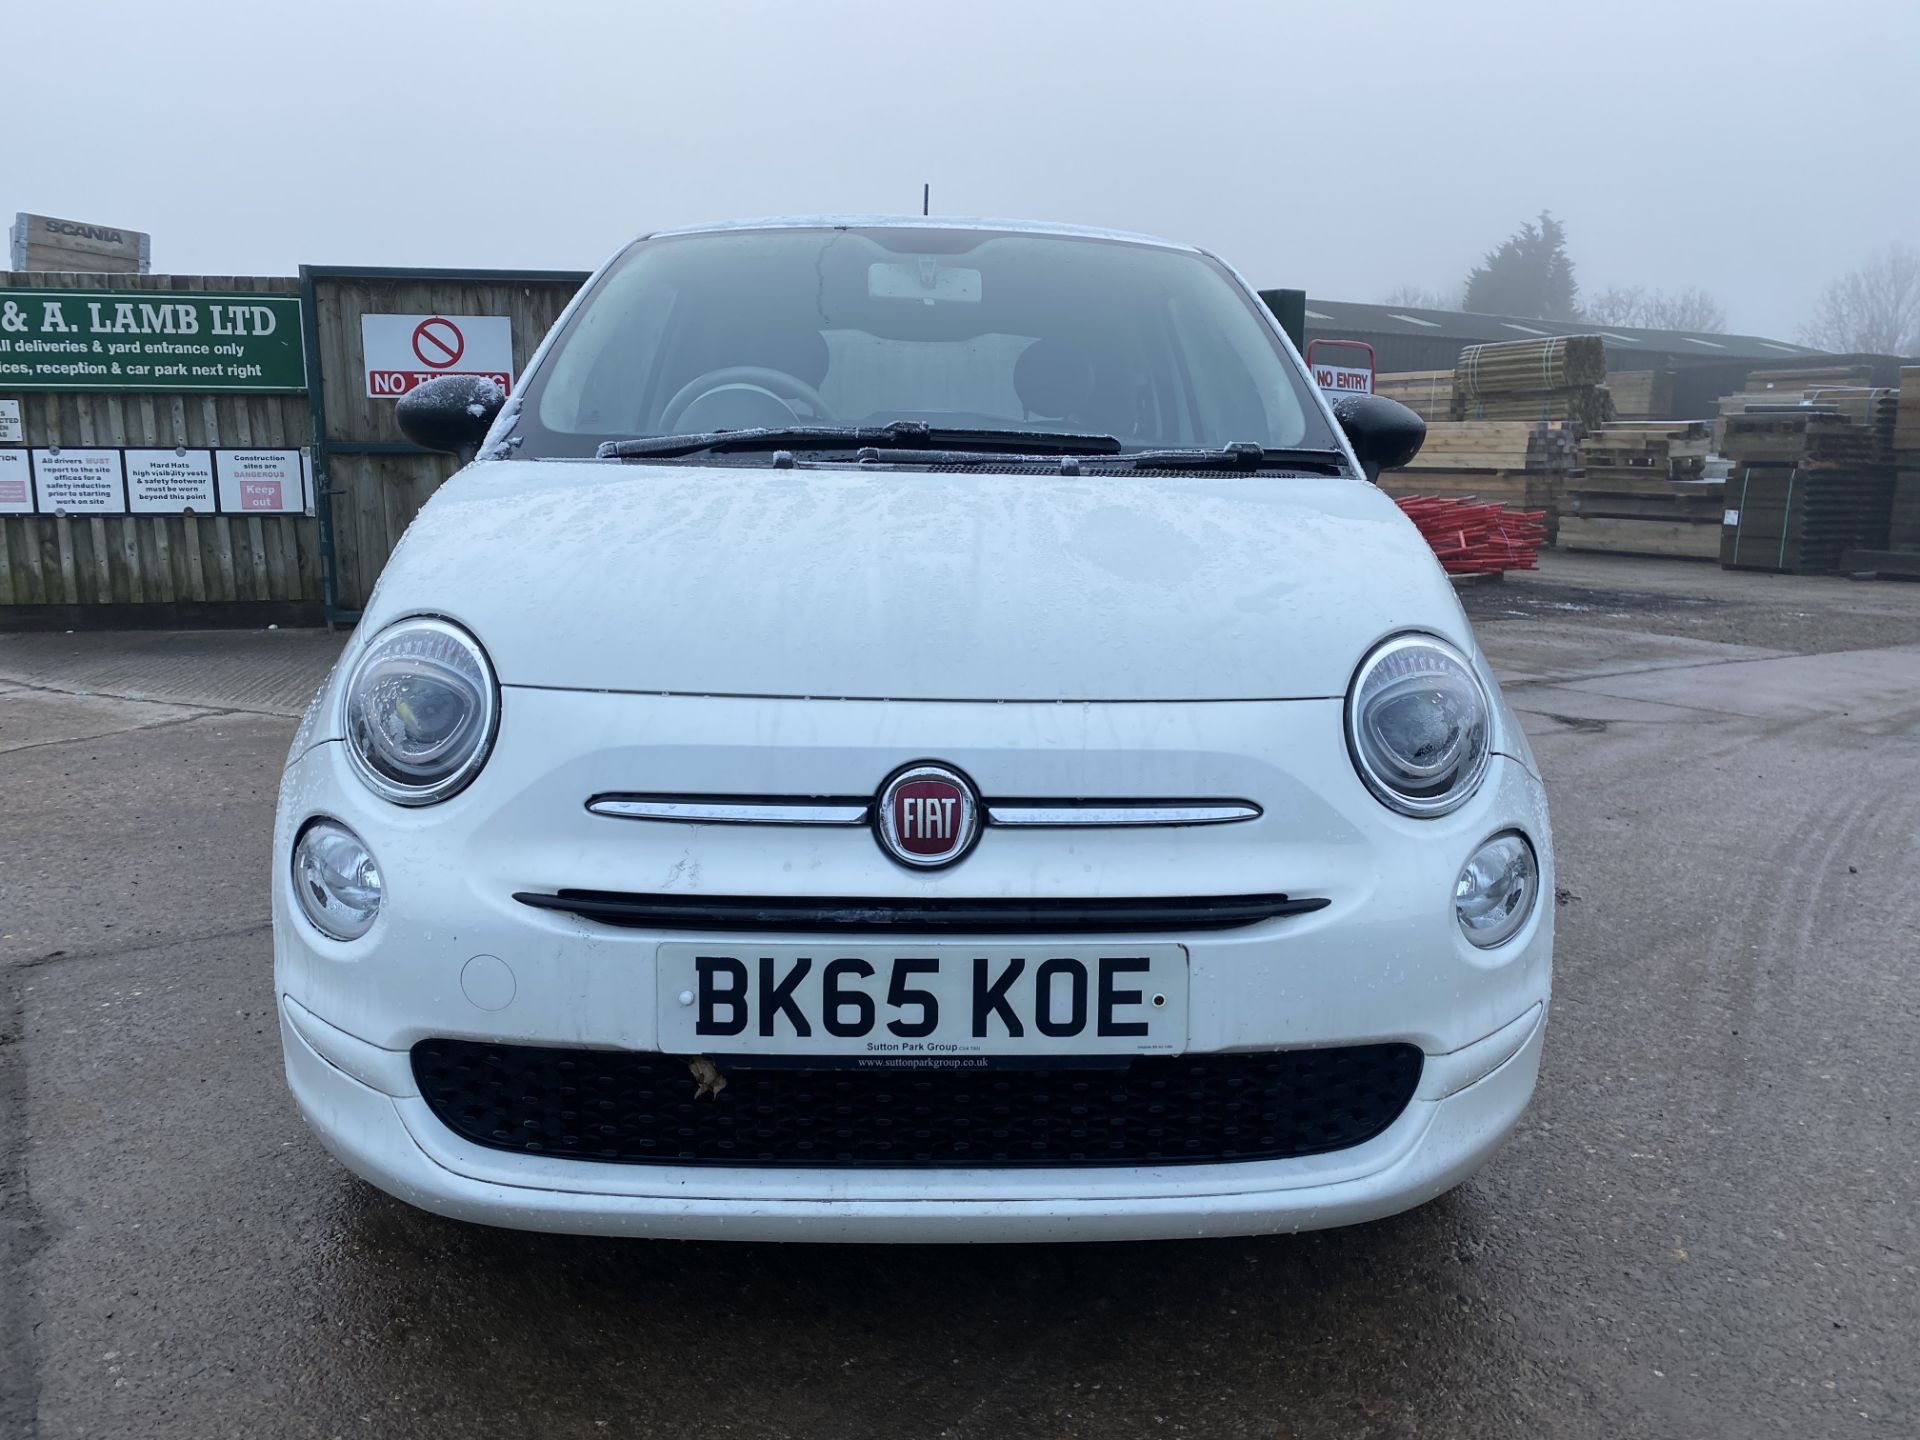 On Sale FIAT 500 "POP" 1.2 PETROL - 2016 MODEL - 1 KEEPER - ONLY 44K MILES FROM NEW - AIR CON - LOOK - Image 3 of 18